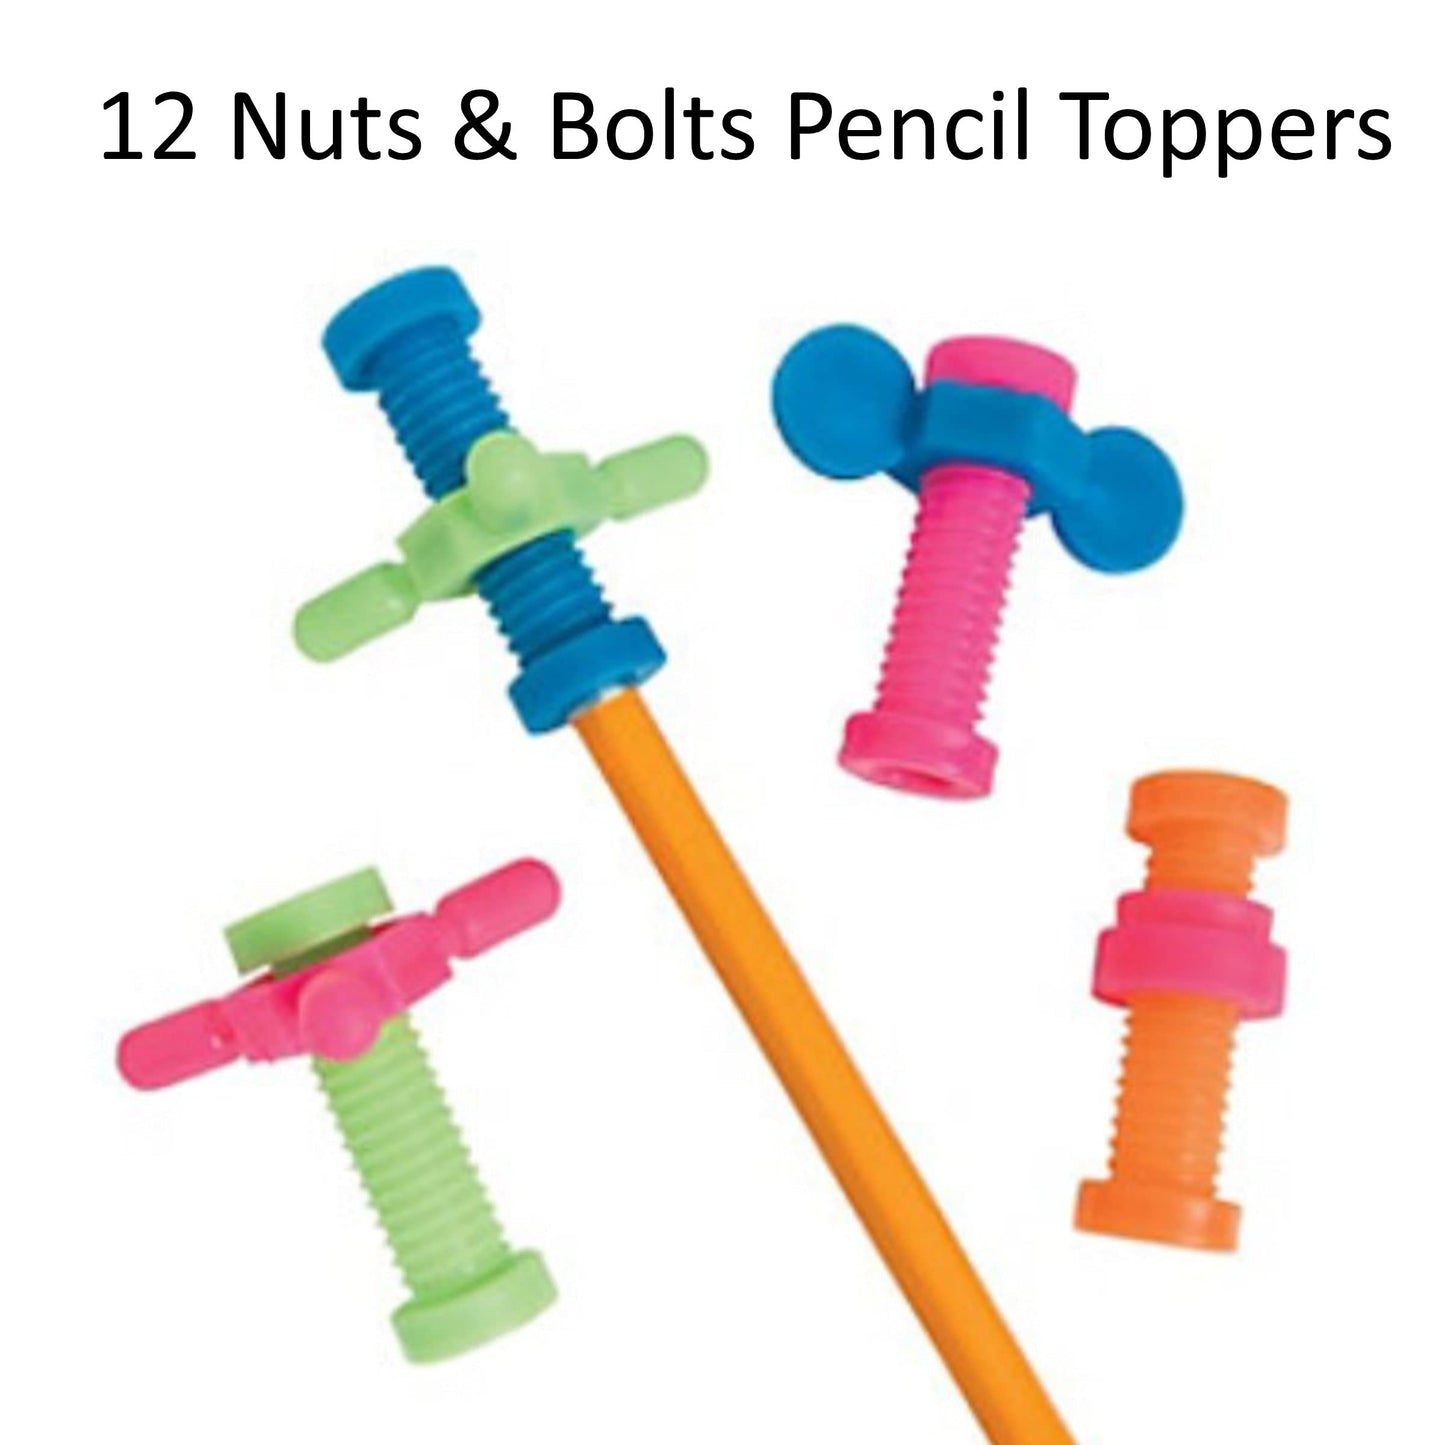 36 pc Fun Fidgets & Gadgets Pencil Toppers (12 Cute Wiggle Eyes, 12 Sensory Hedge Balls, & 12 Nuts, Bolts & Screws Pencil Toppers)